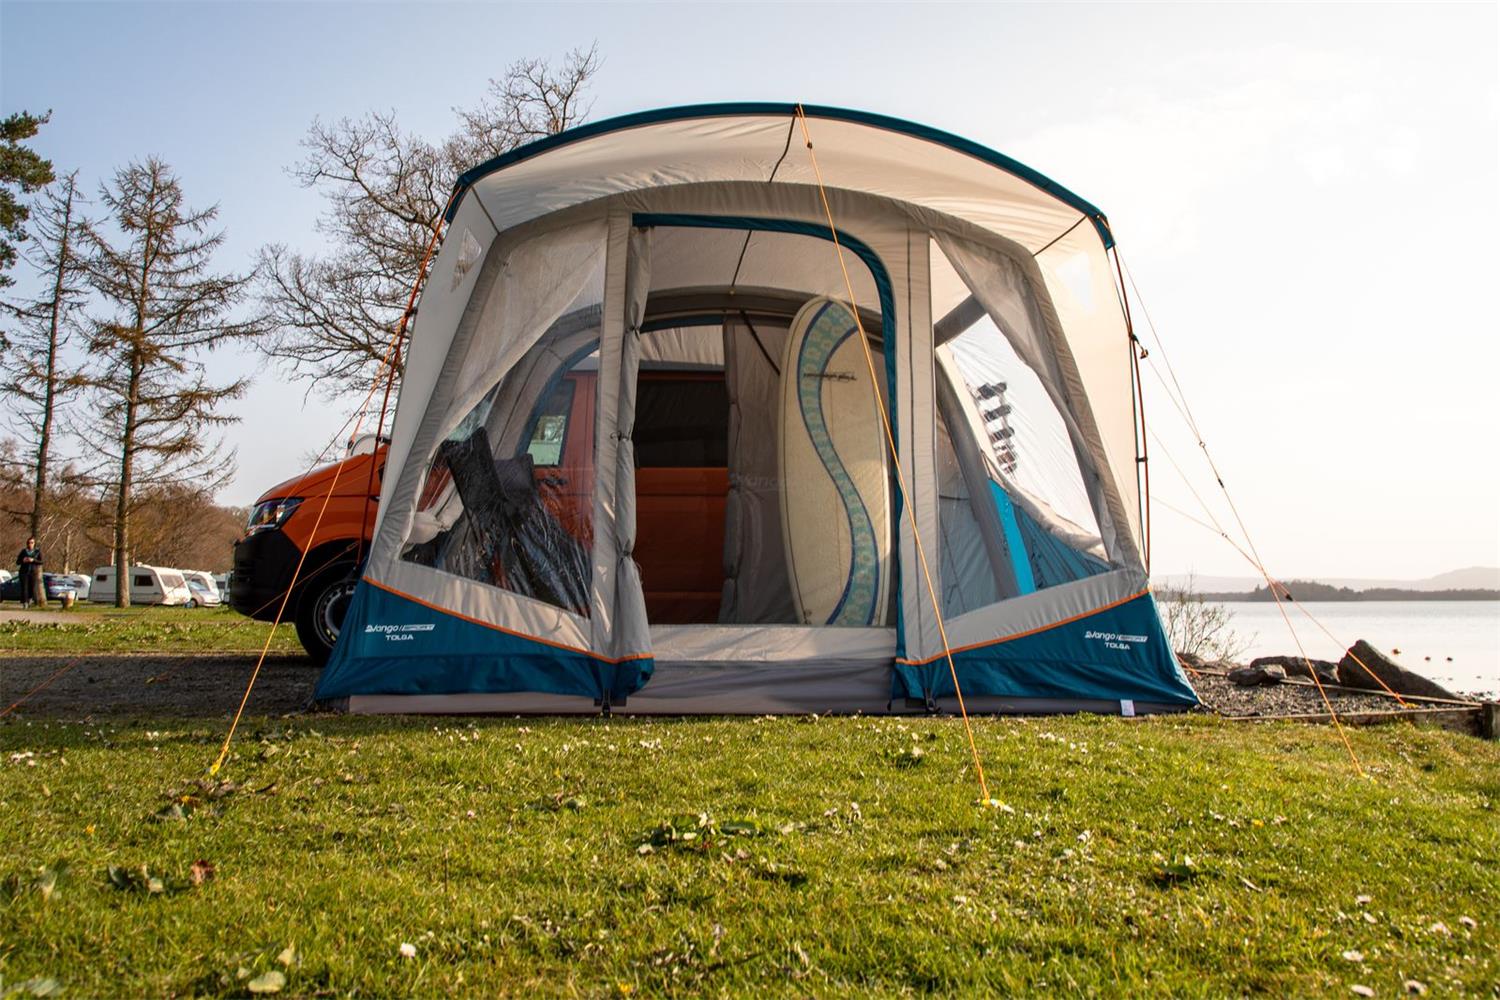 Relax and watch the hours go by in the Vango Tolga VW driveaway awning.